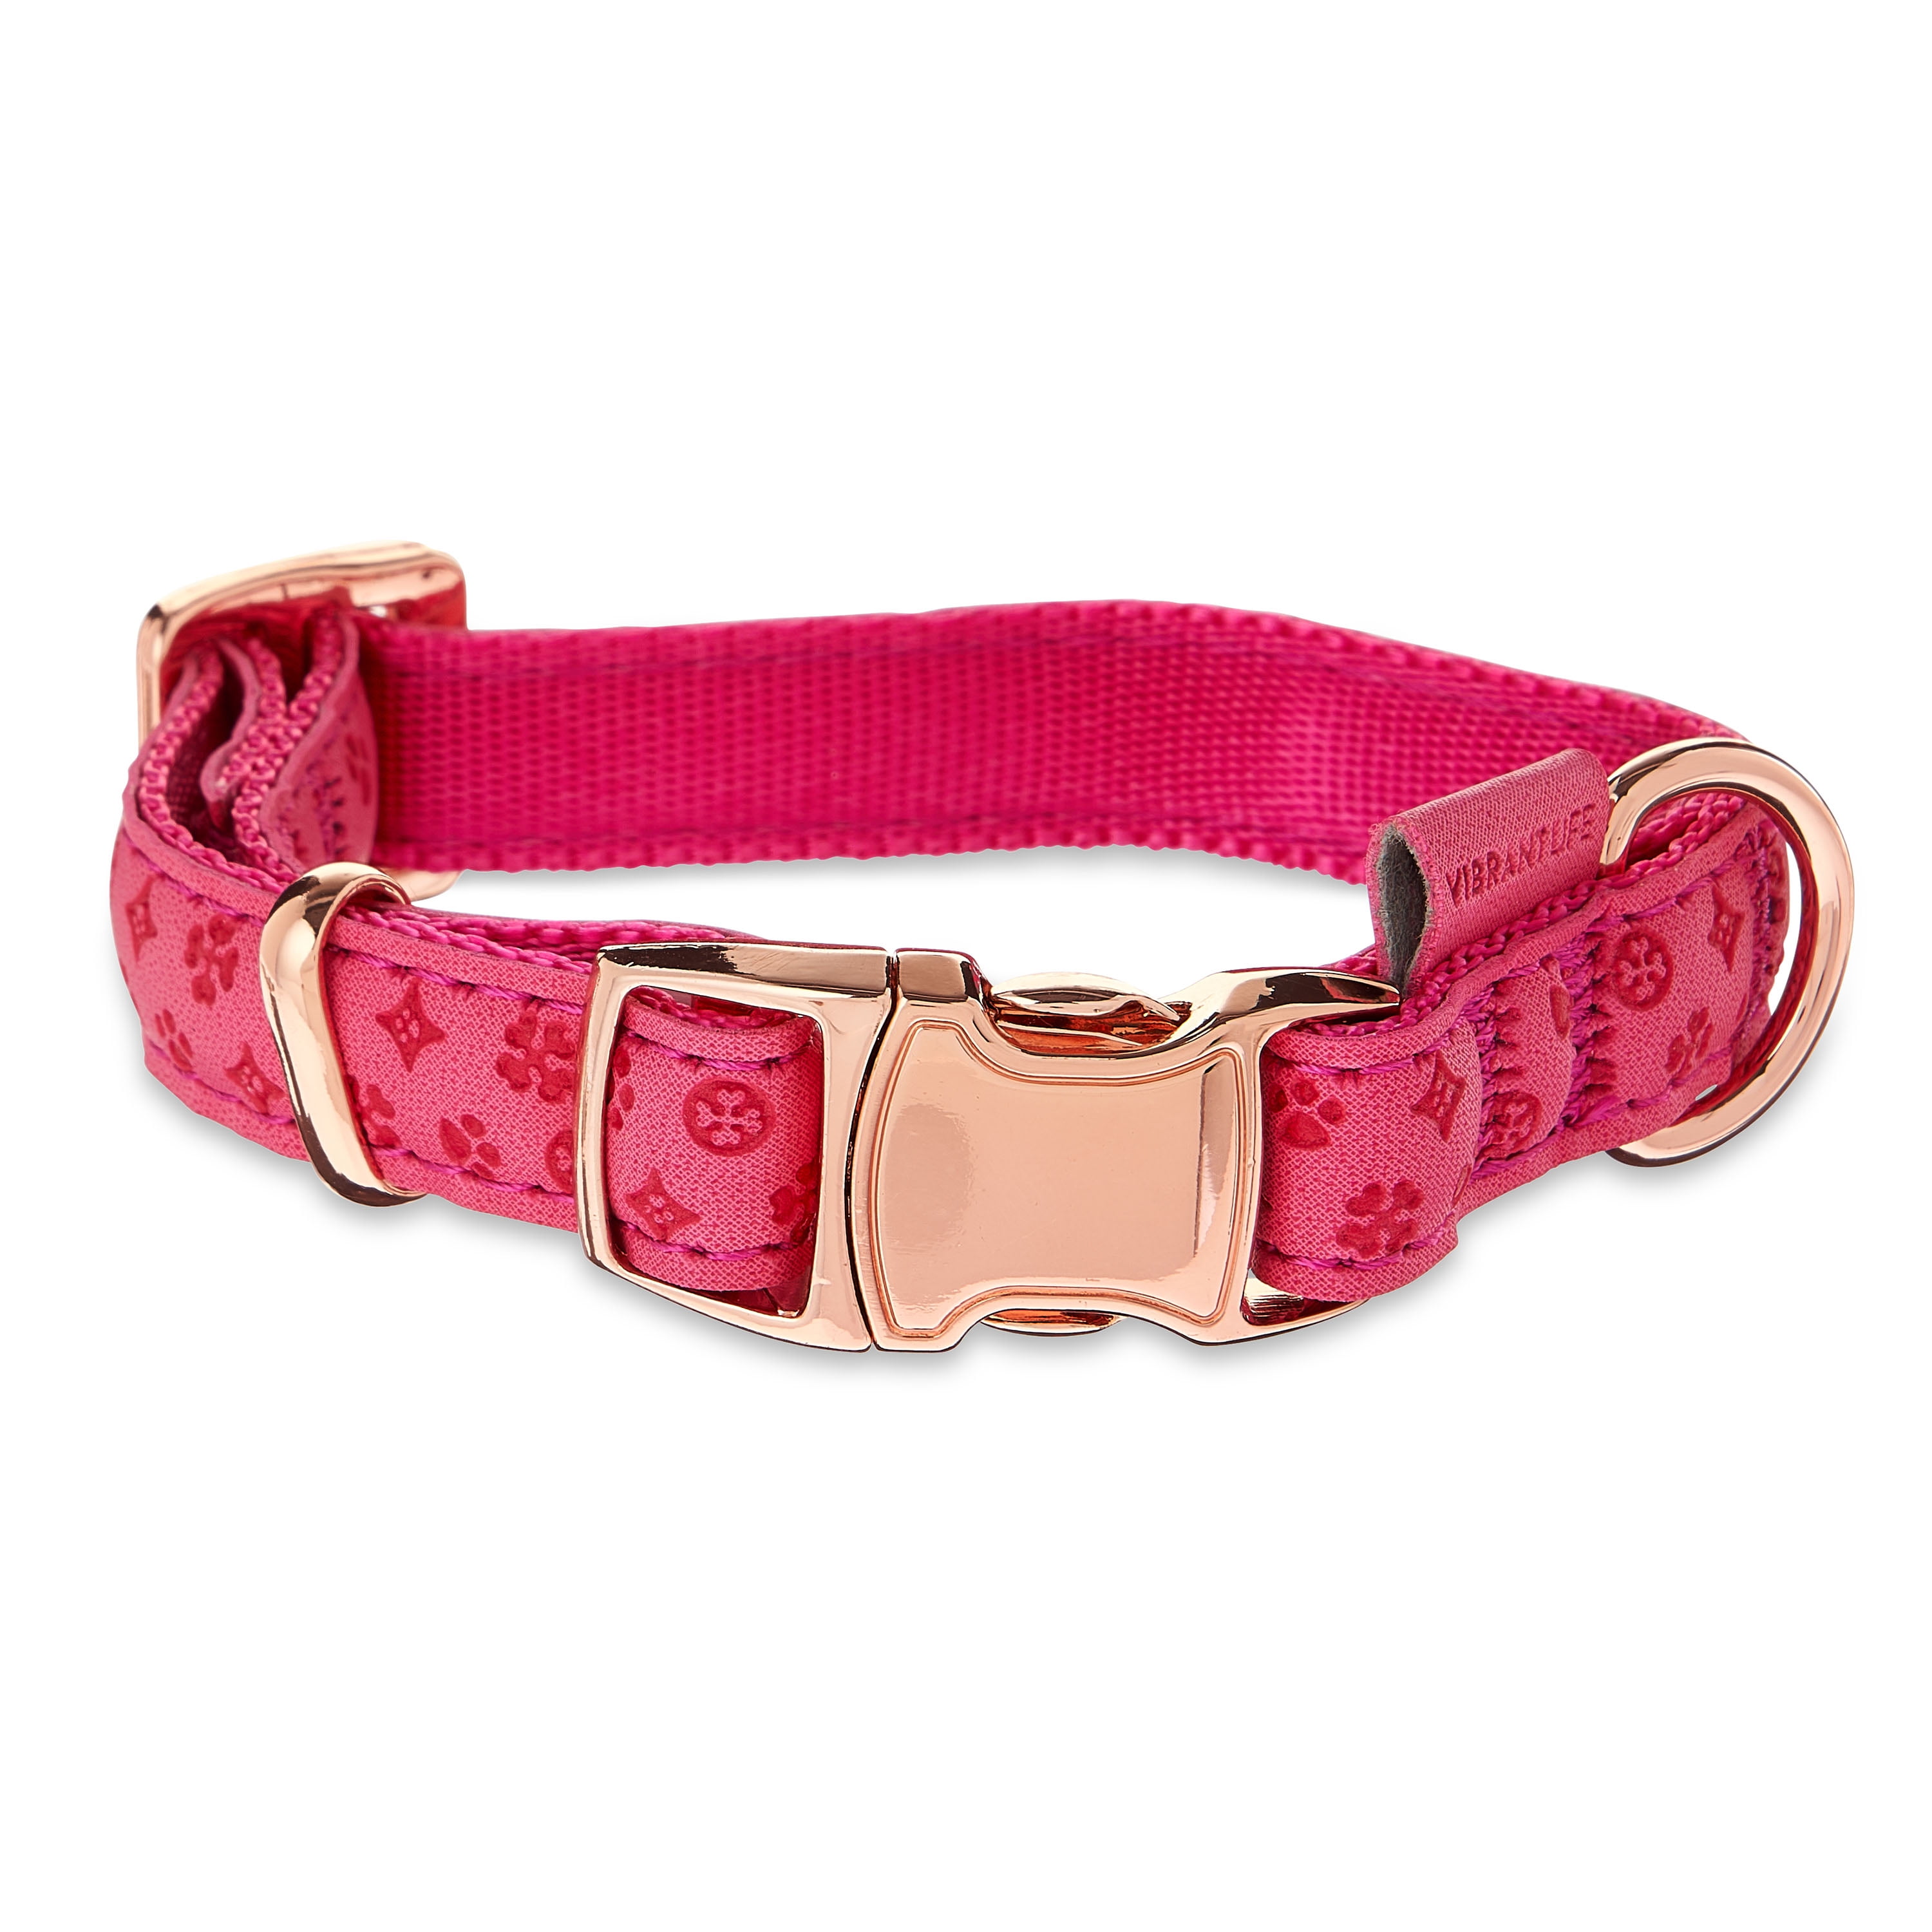 Pet Palace "Pretty in Pink" Leather Diamante Dog Collar with FREE LED bone light 